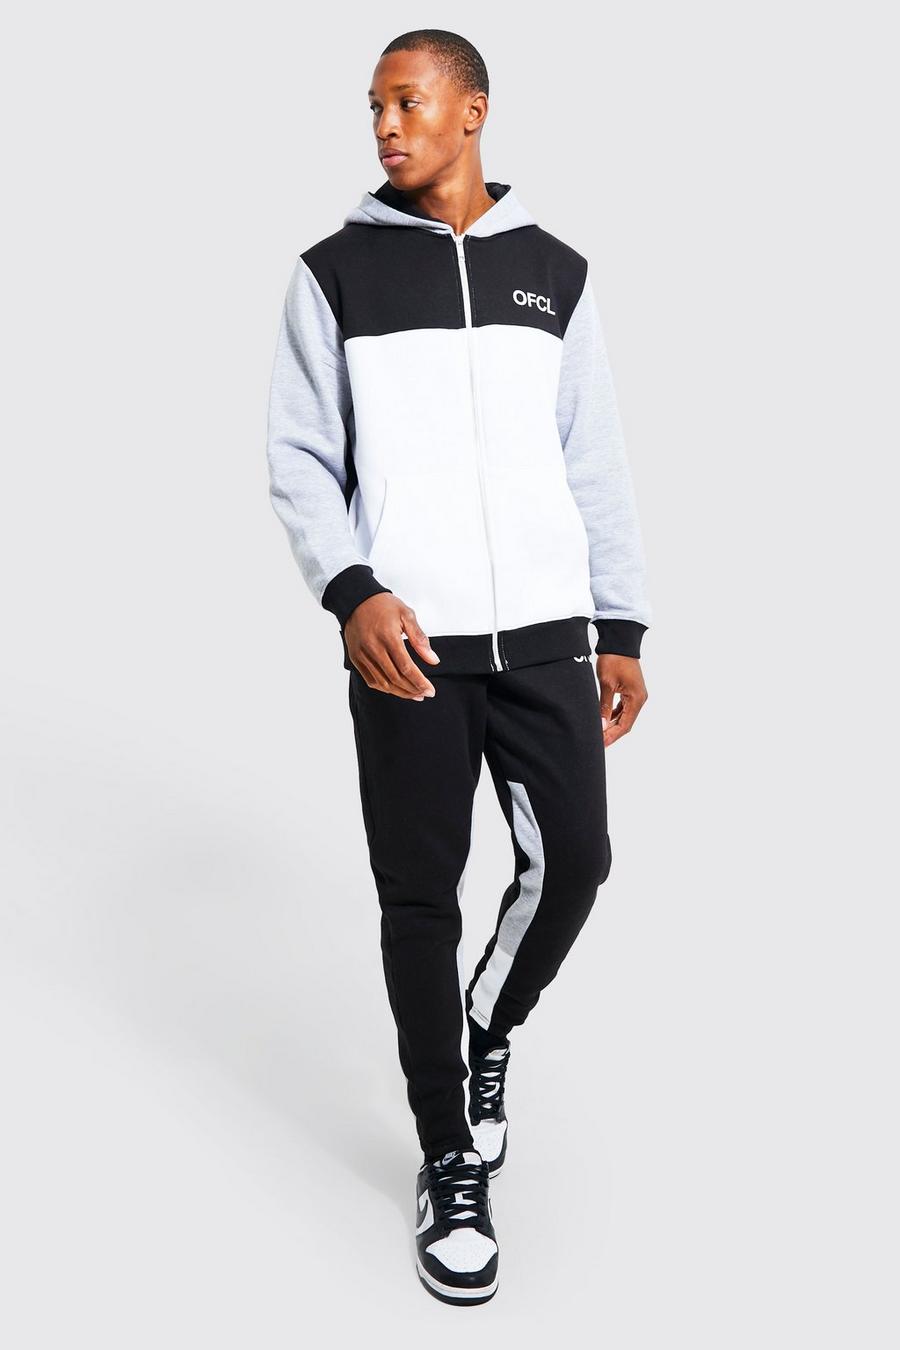 Grey marl Ofcl Colour Block Zip Hooded Tracksuit